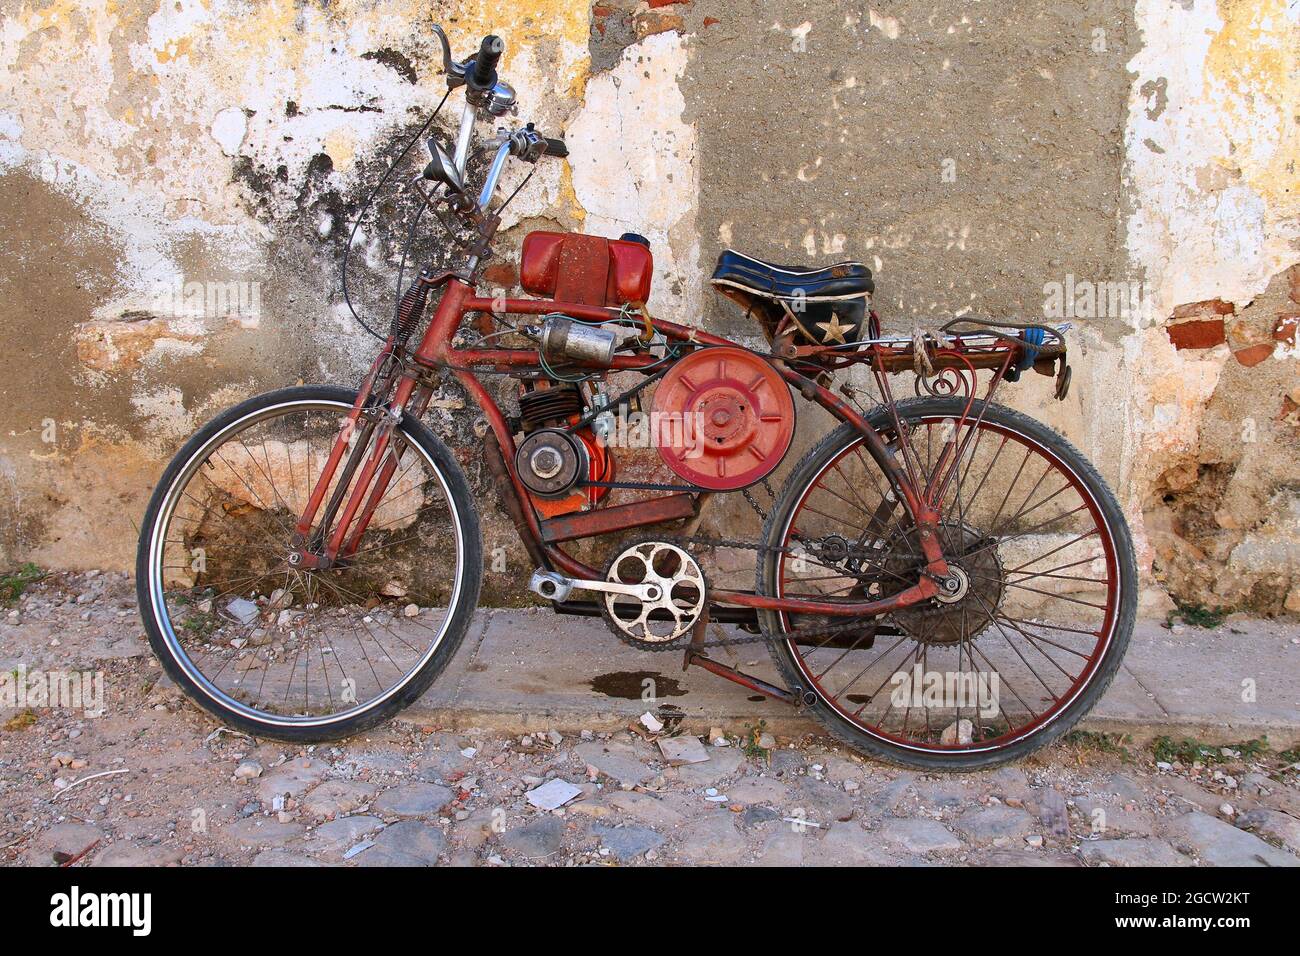 Custom modified bicycle. Home made motorbike made from bicycle and a small petrol engine. Effects of poverty in Cuba. Stock Photo